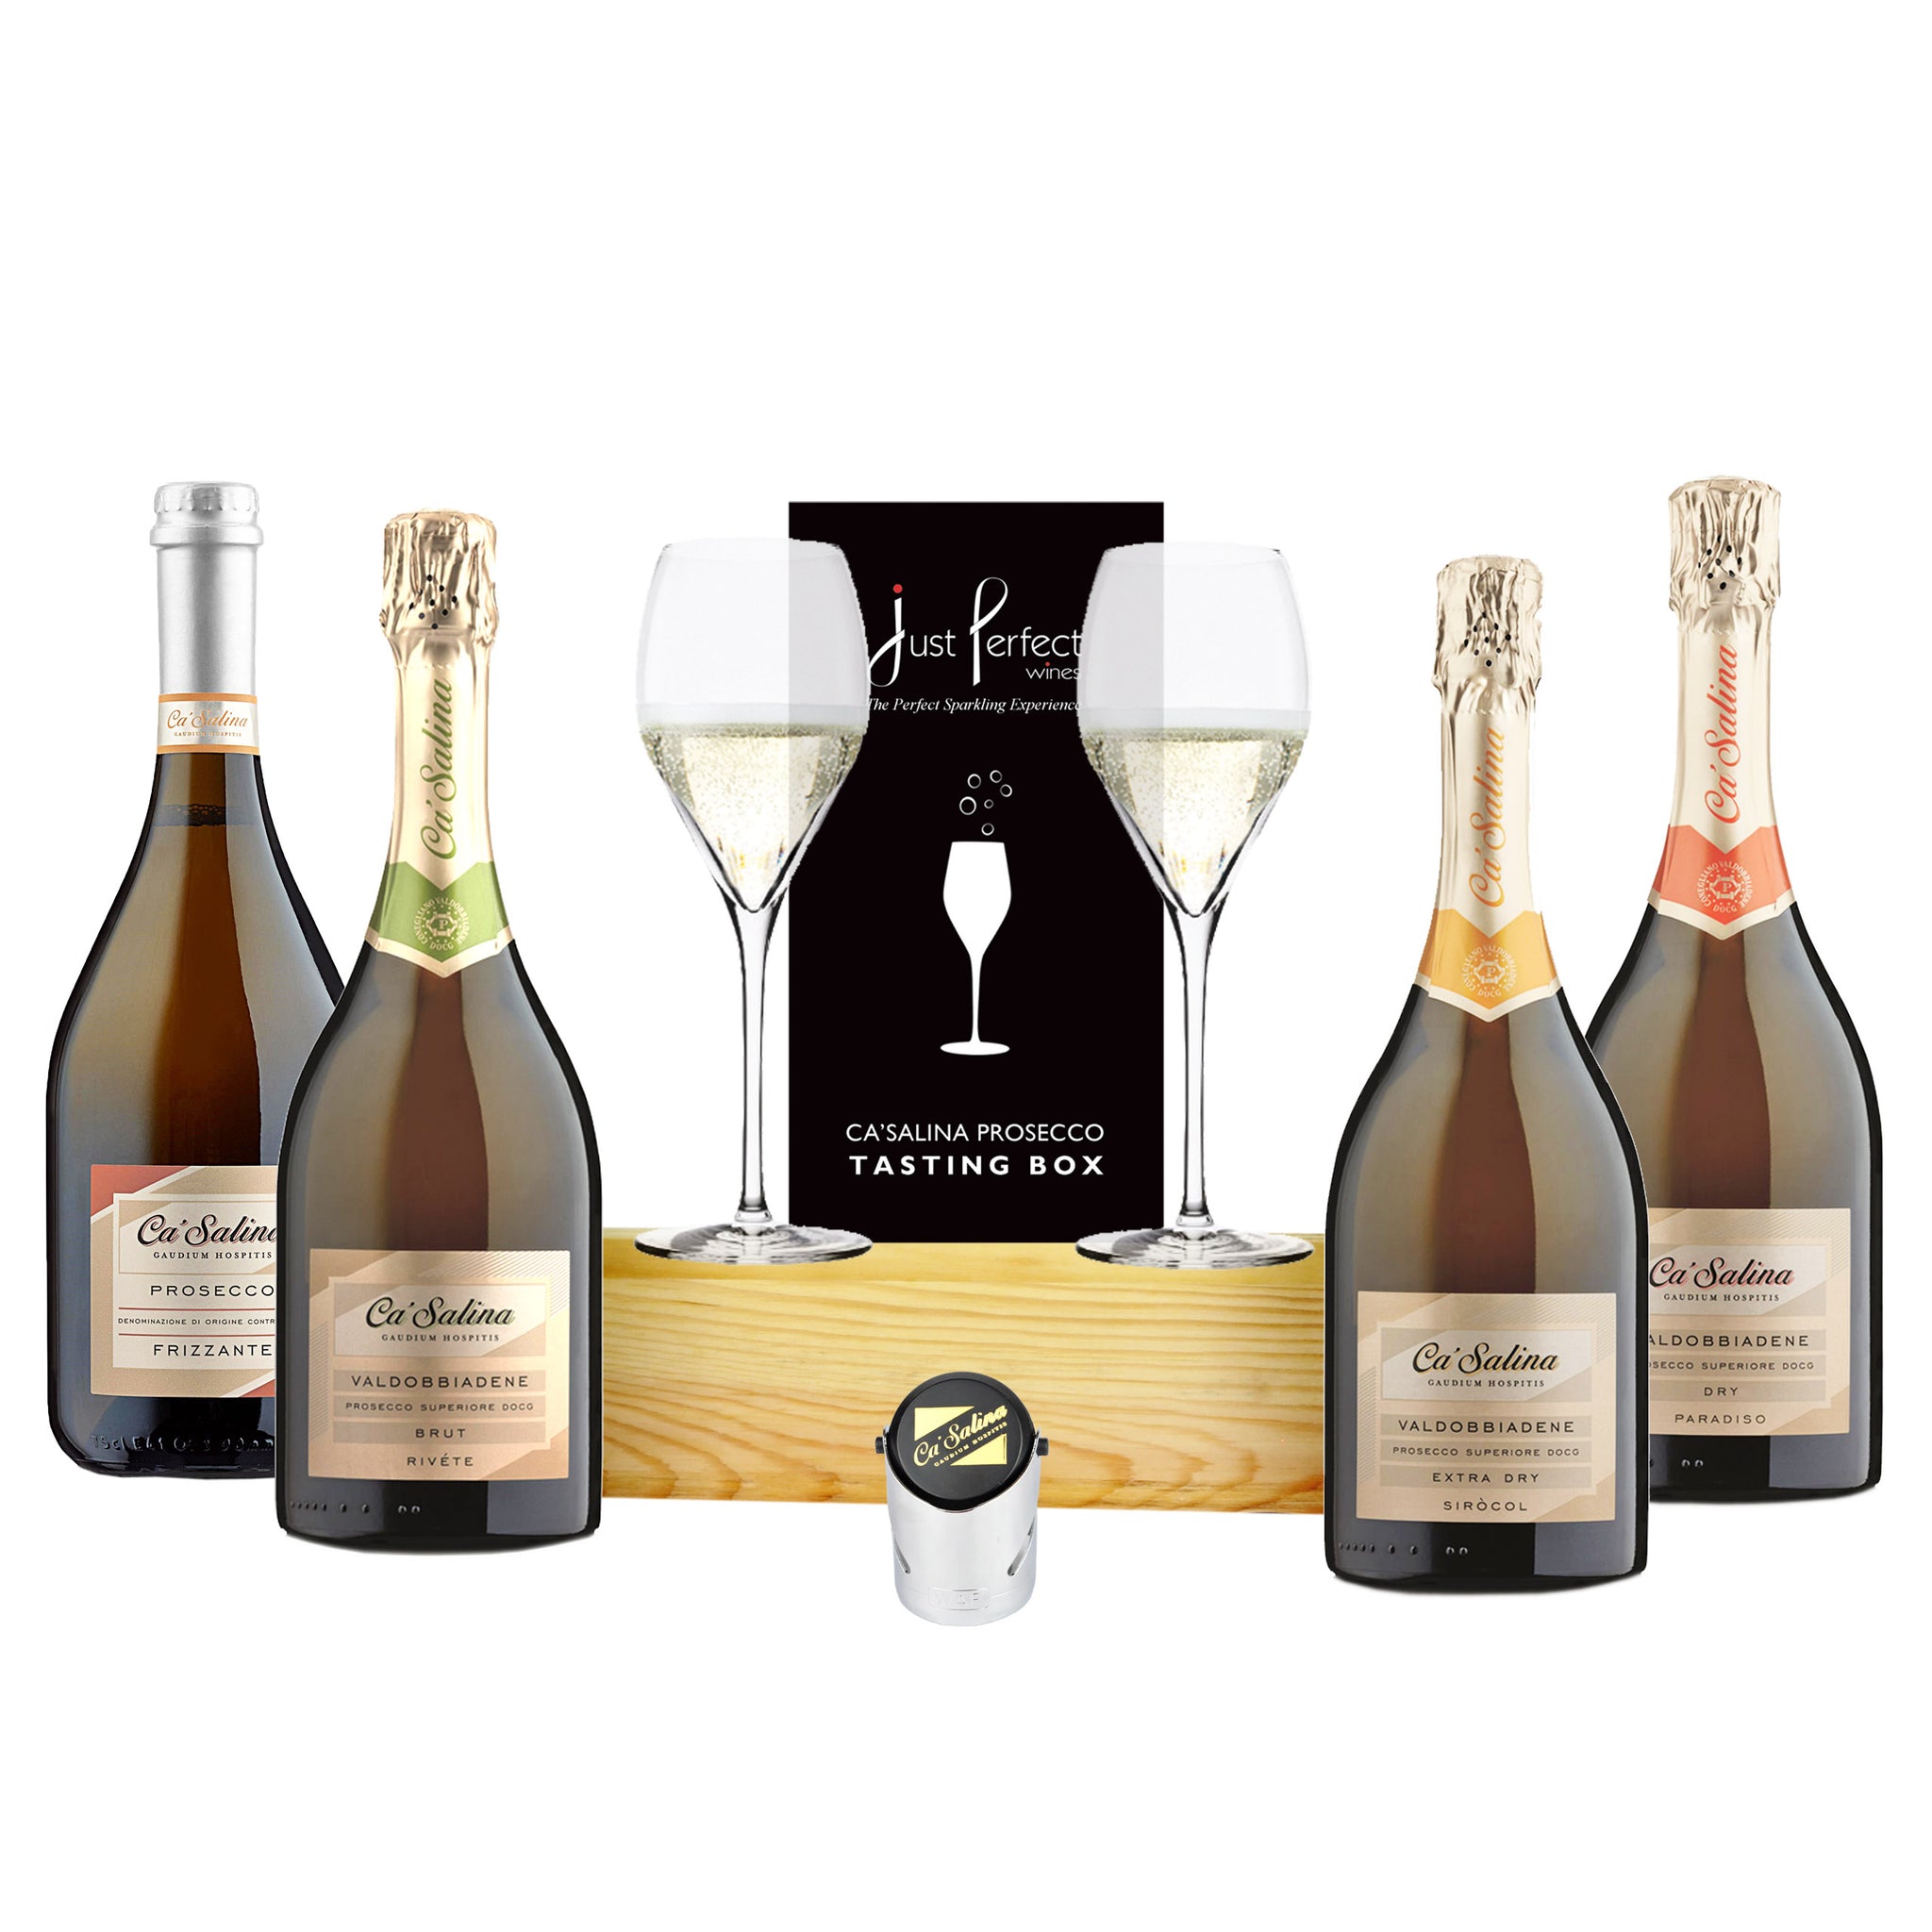 Ca'Salina Prosecco Tasting Box - 4 full sized different Proseccos , Ca'Salina branded Prosecco glasses, Prosecco Stopper and Tasting Guide - all you need for a Prosecco event in a box